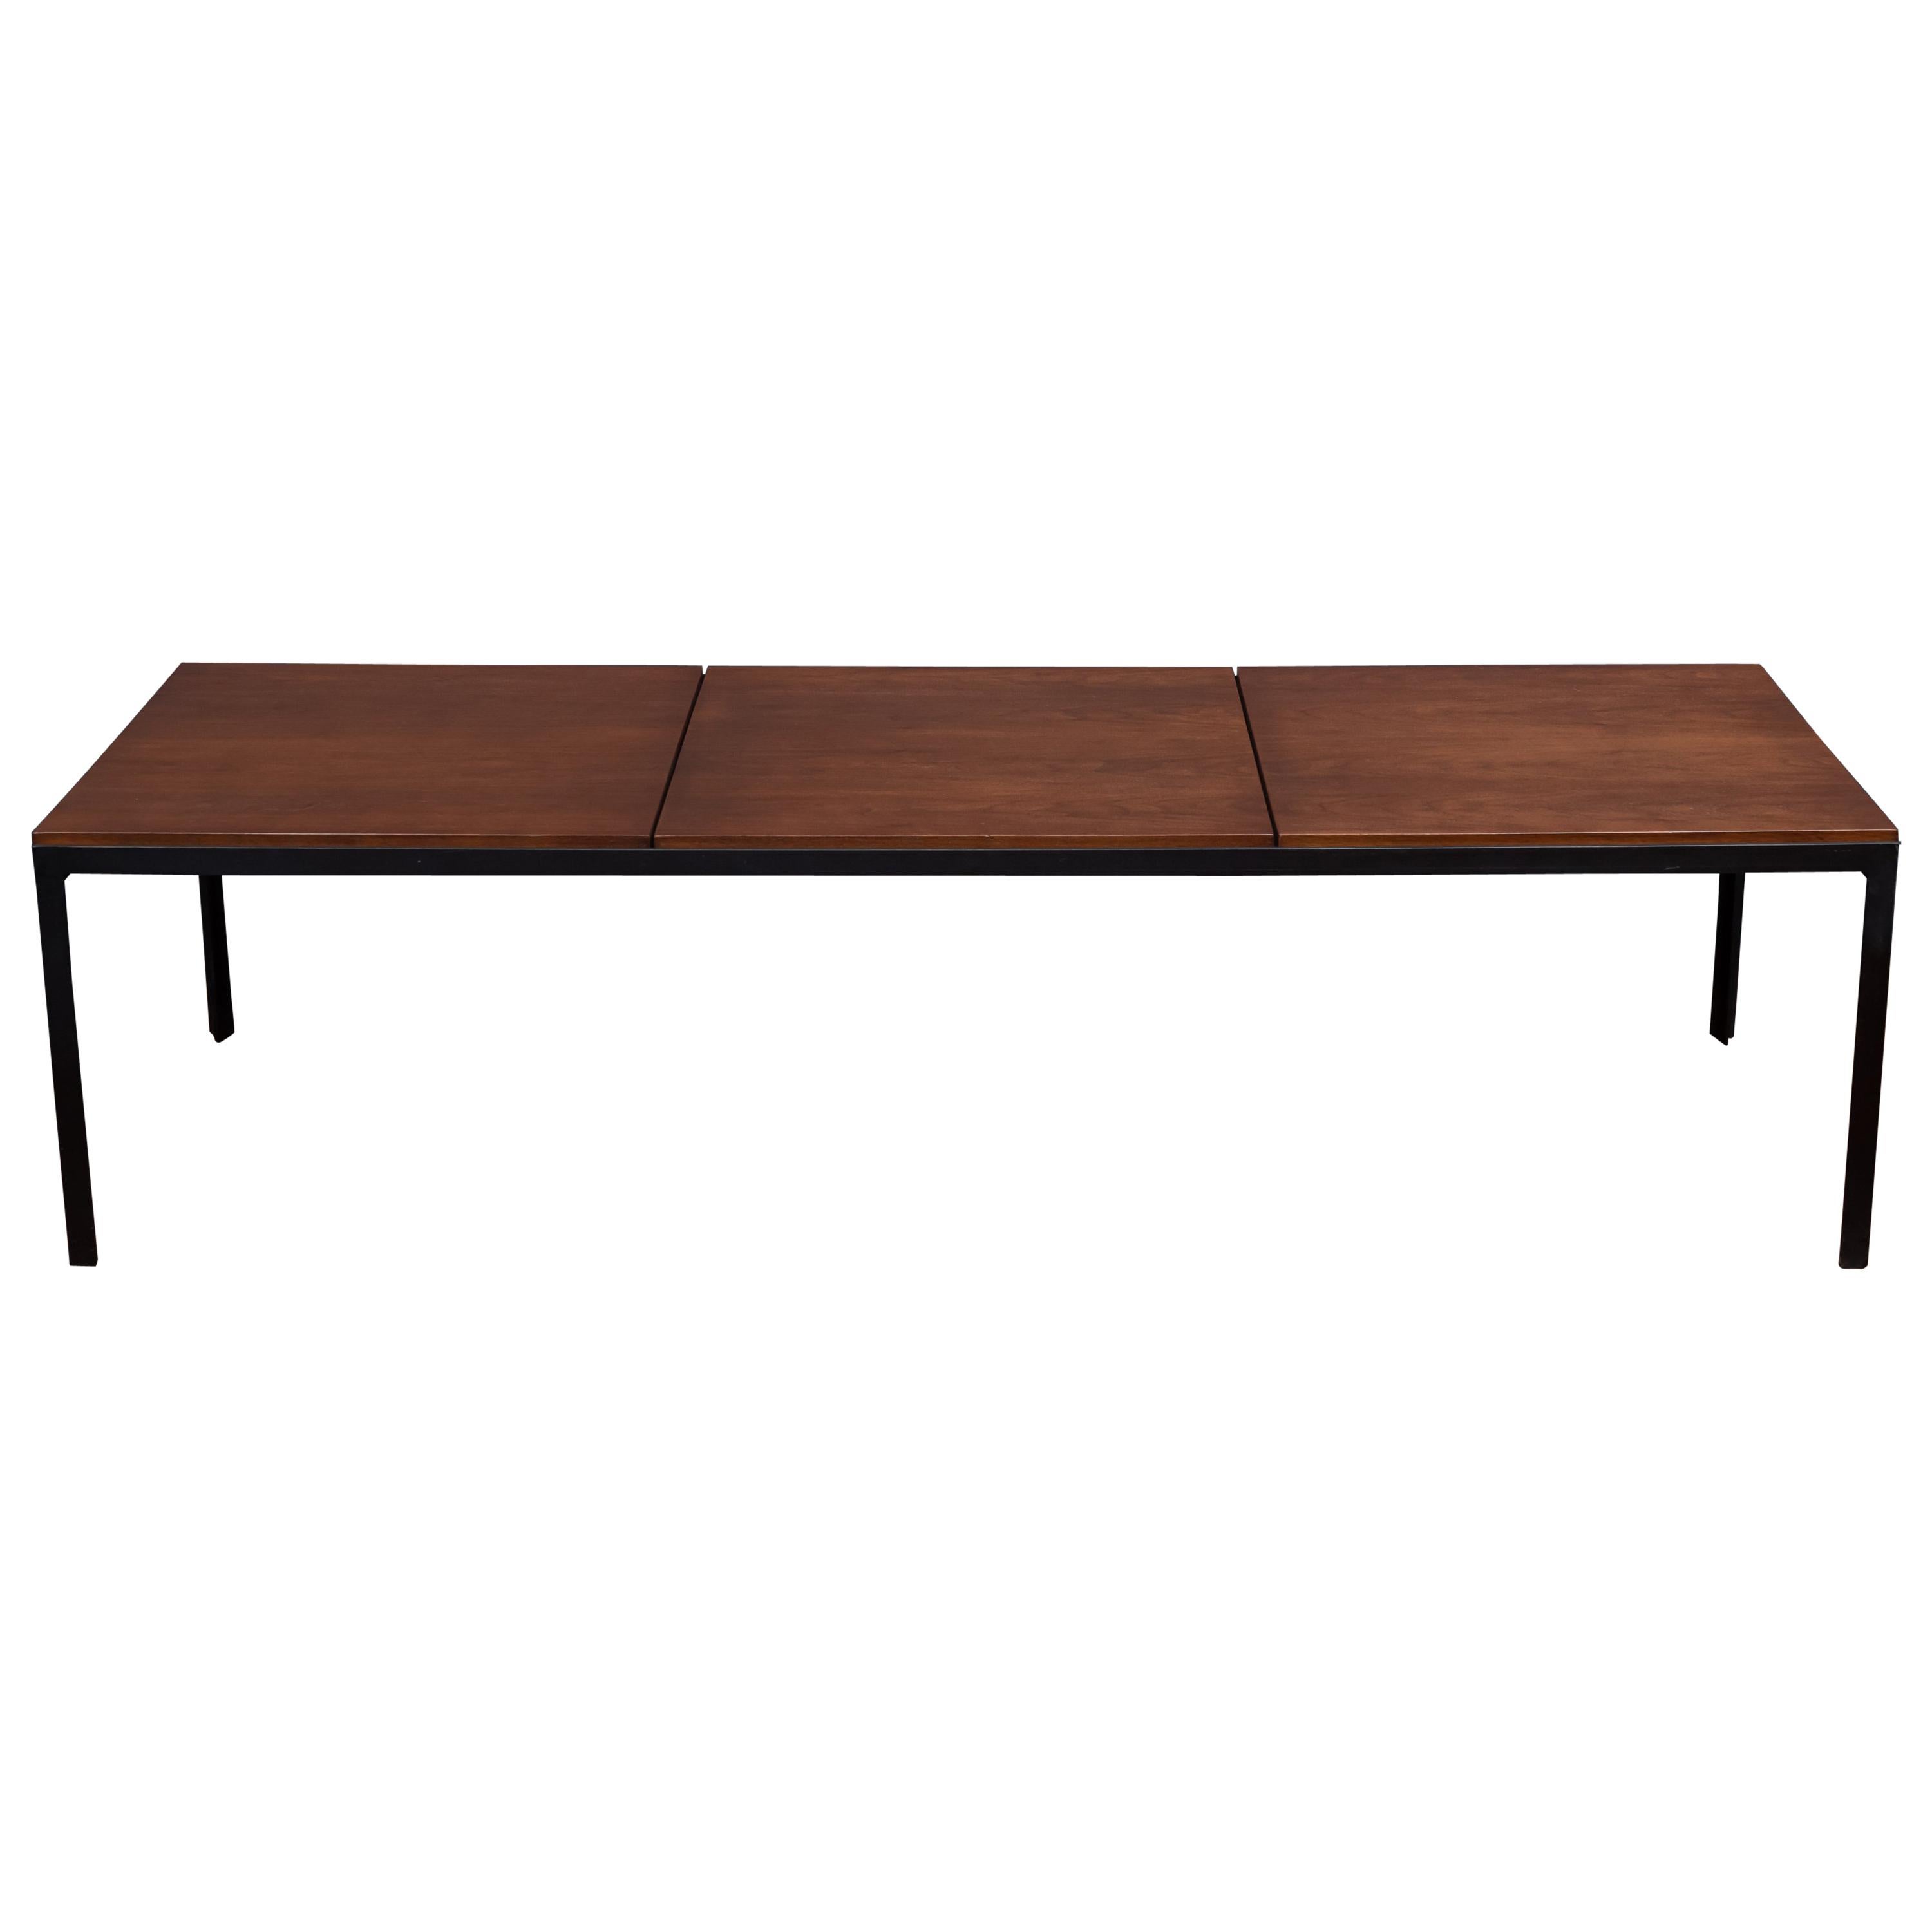 Florence Knoll Walnut Coffee Table Bench